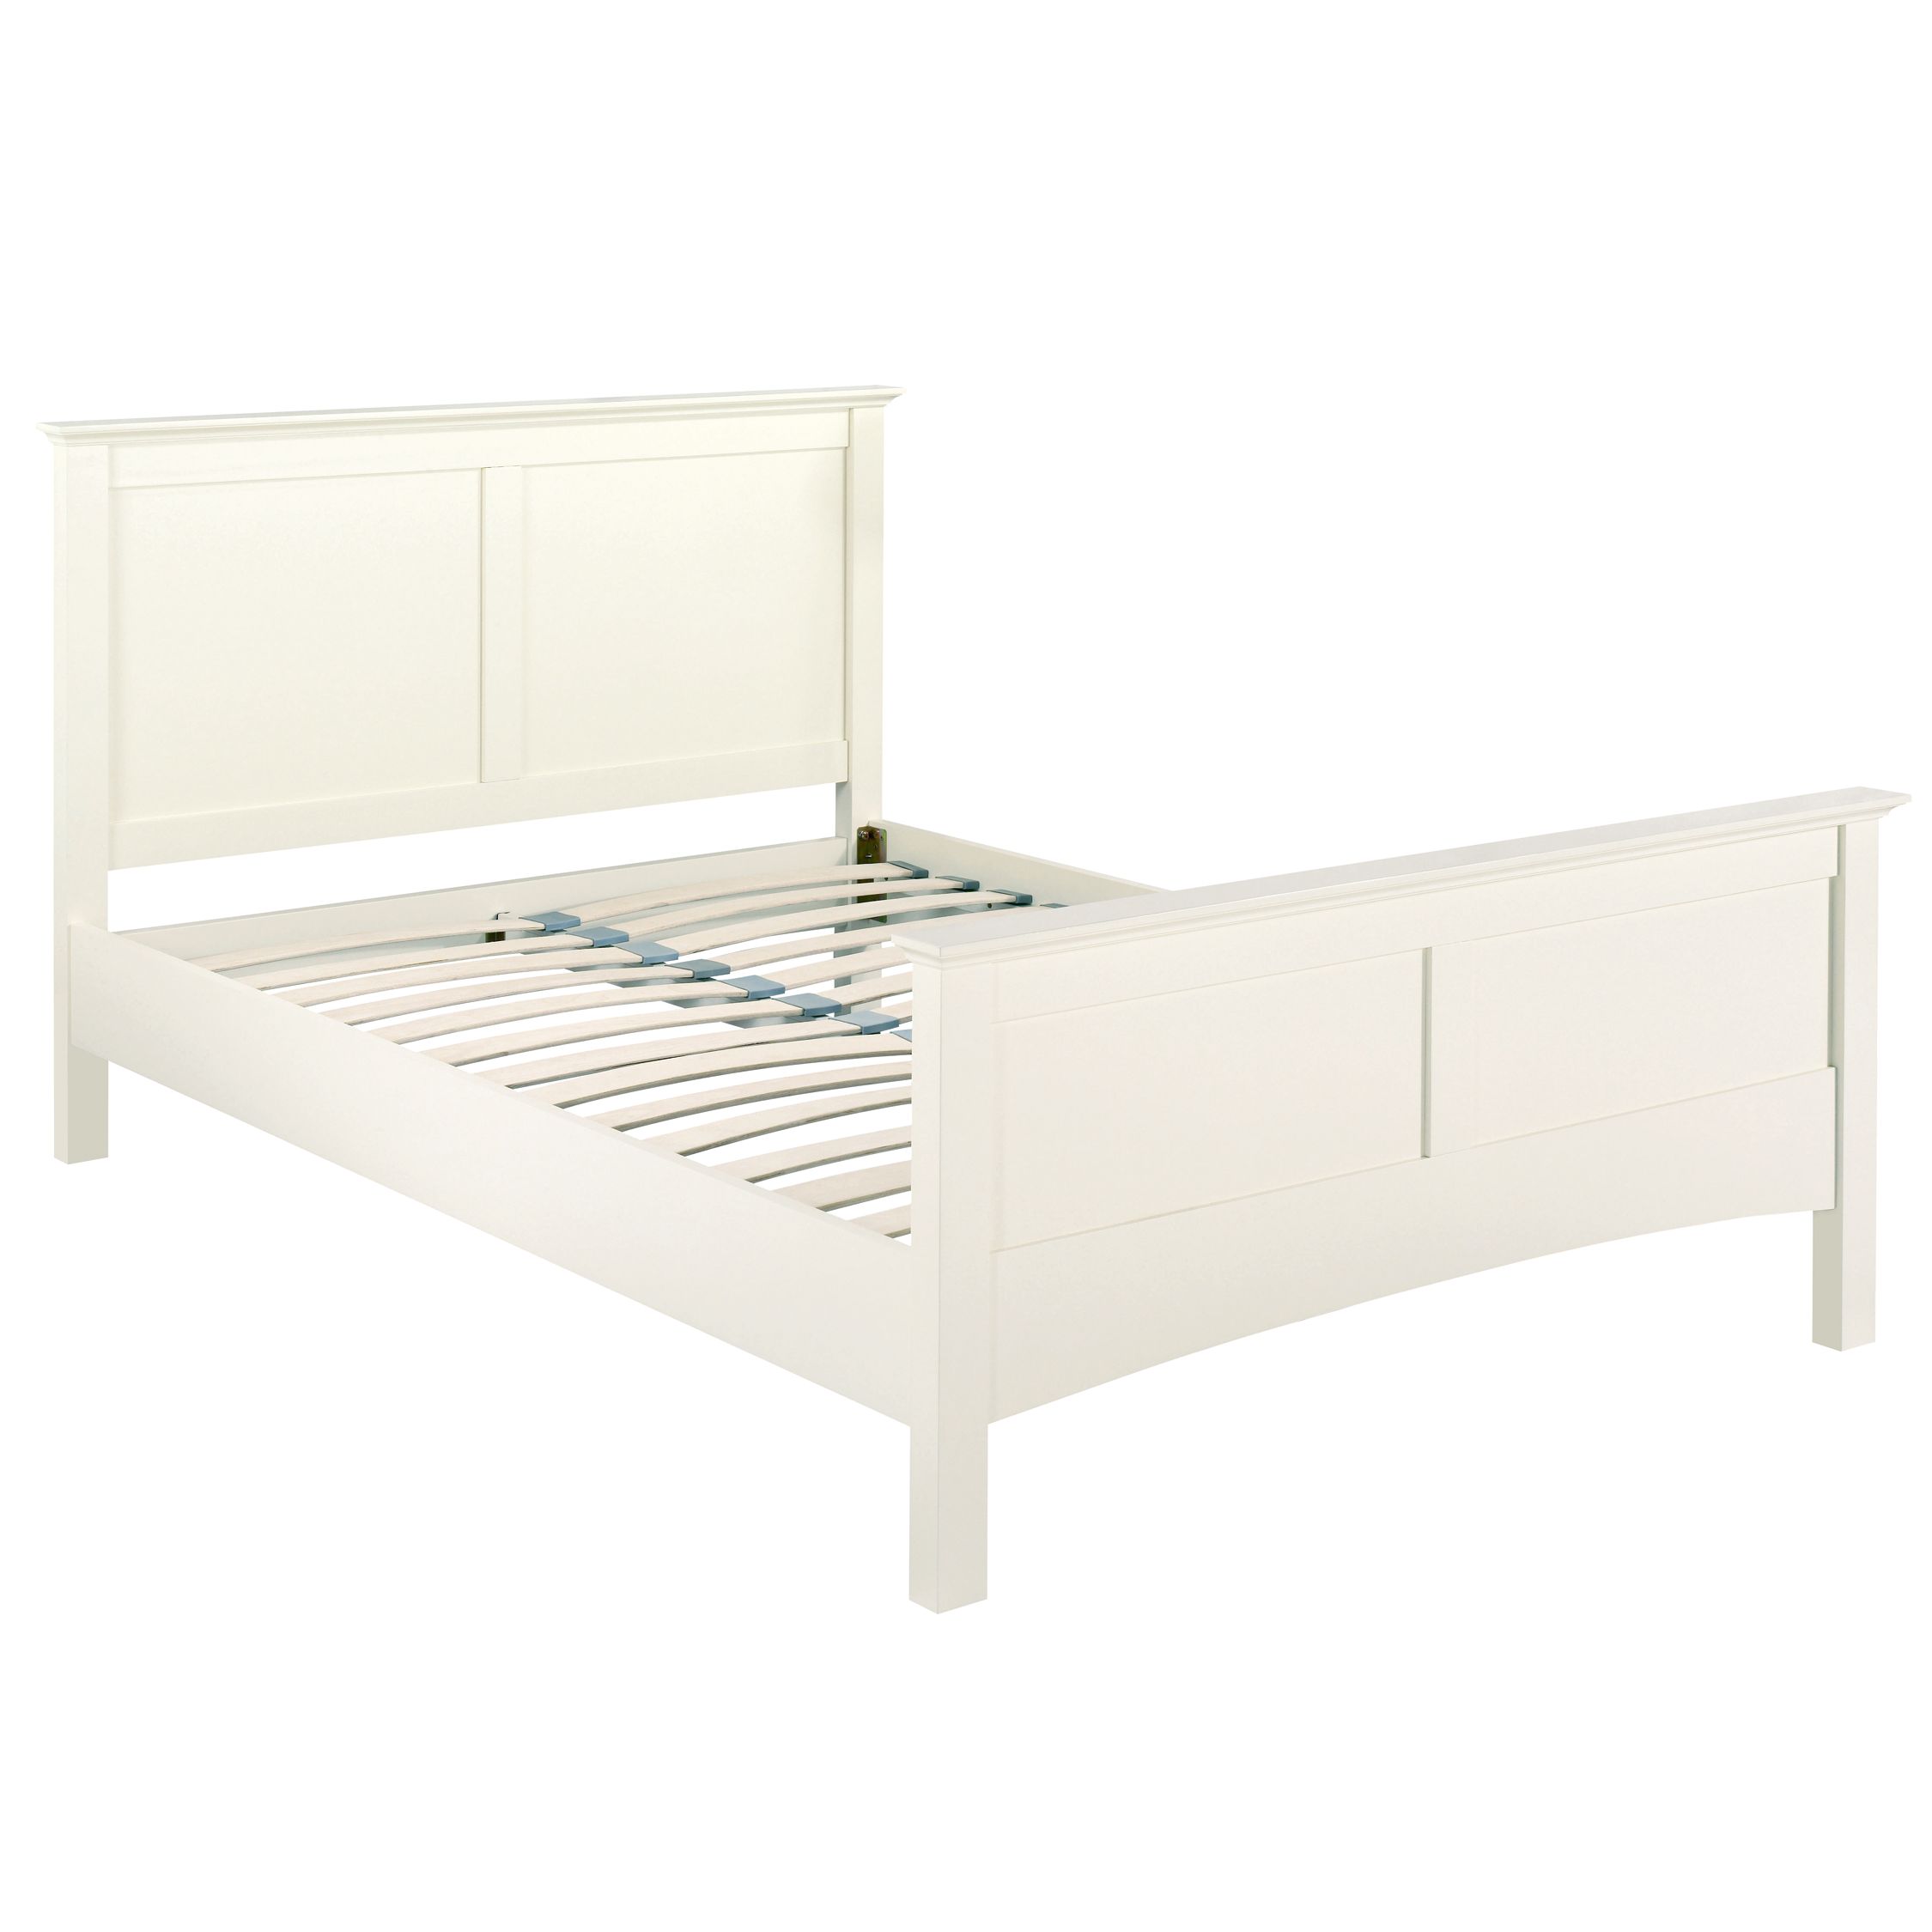 John Lewis Darcy Panel Bedstead, Double, Ivory